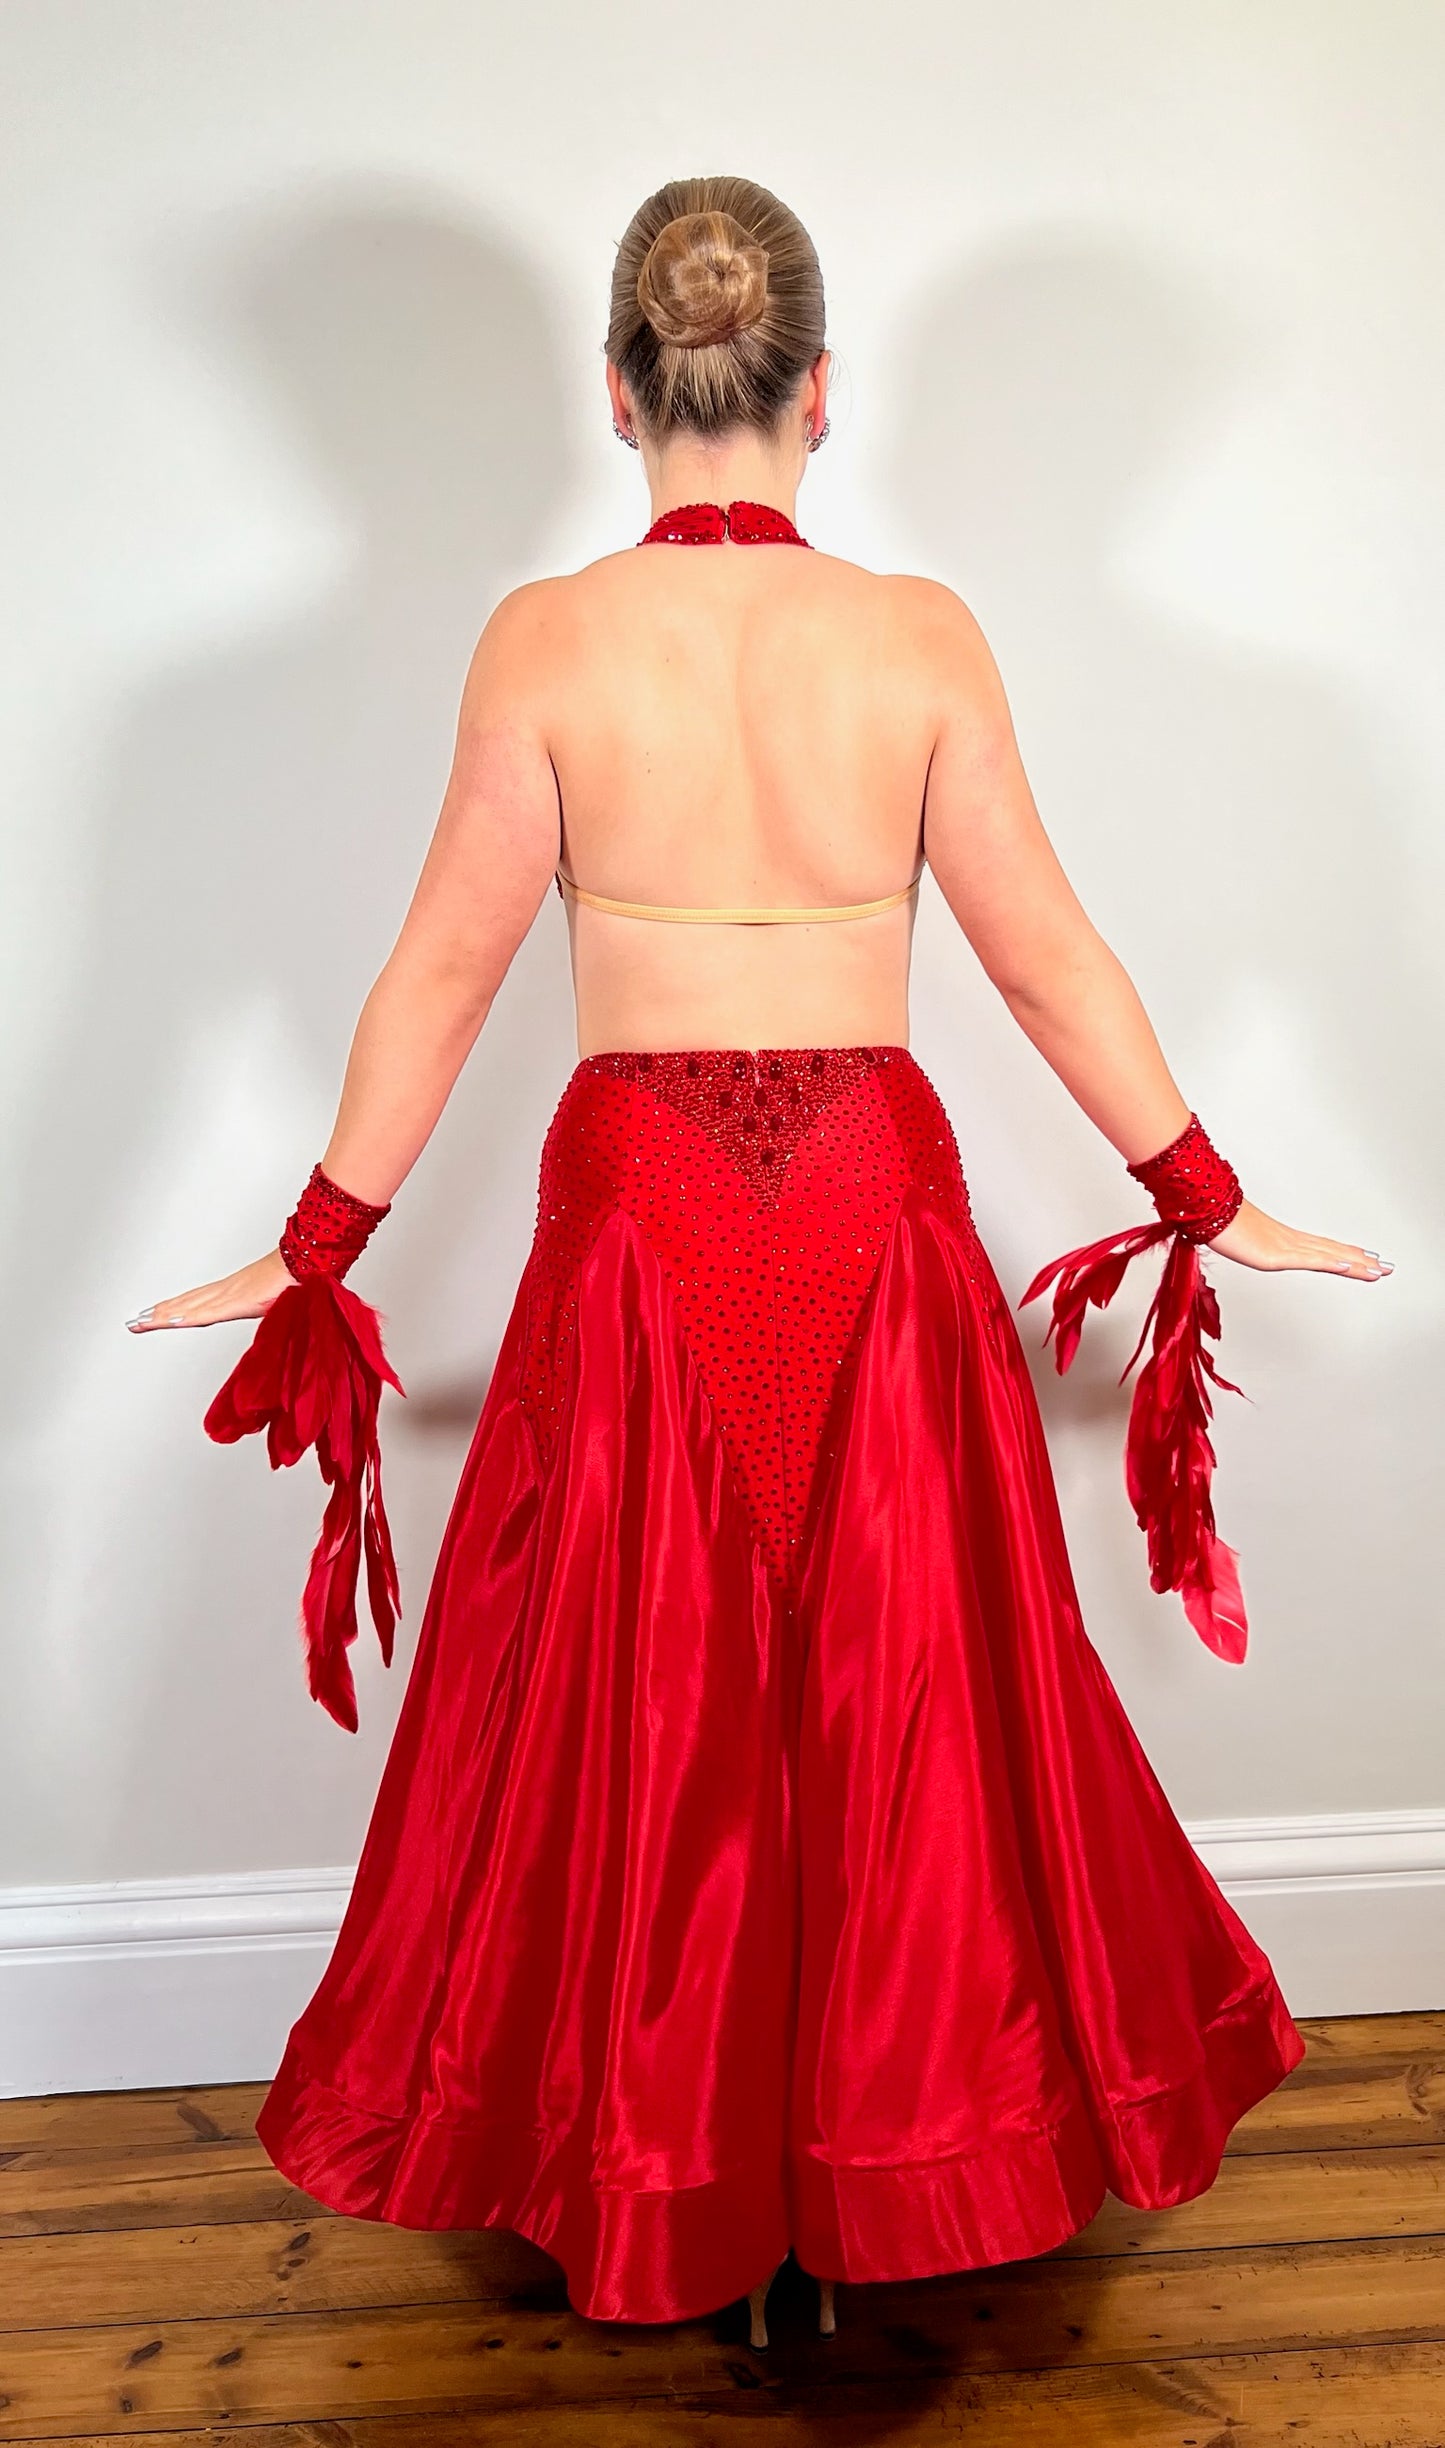 219 Red Sleeveless/Backless Ballroom/Smooth halter neck Dress. Feature panelling to the waist. Long Glove let’s with feather detailing. Flesh strapping to the chest and back.